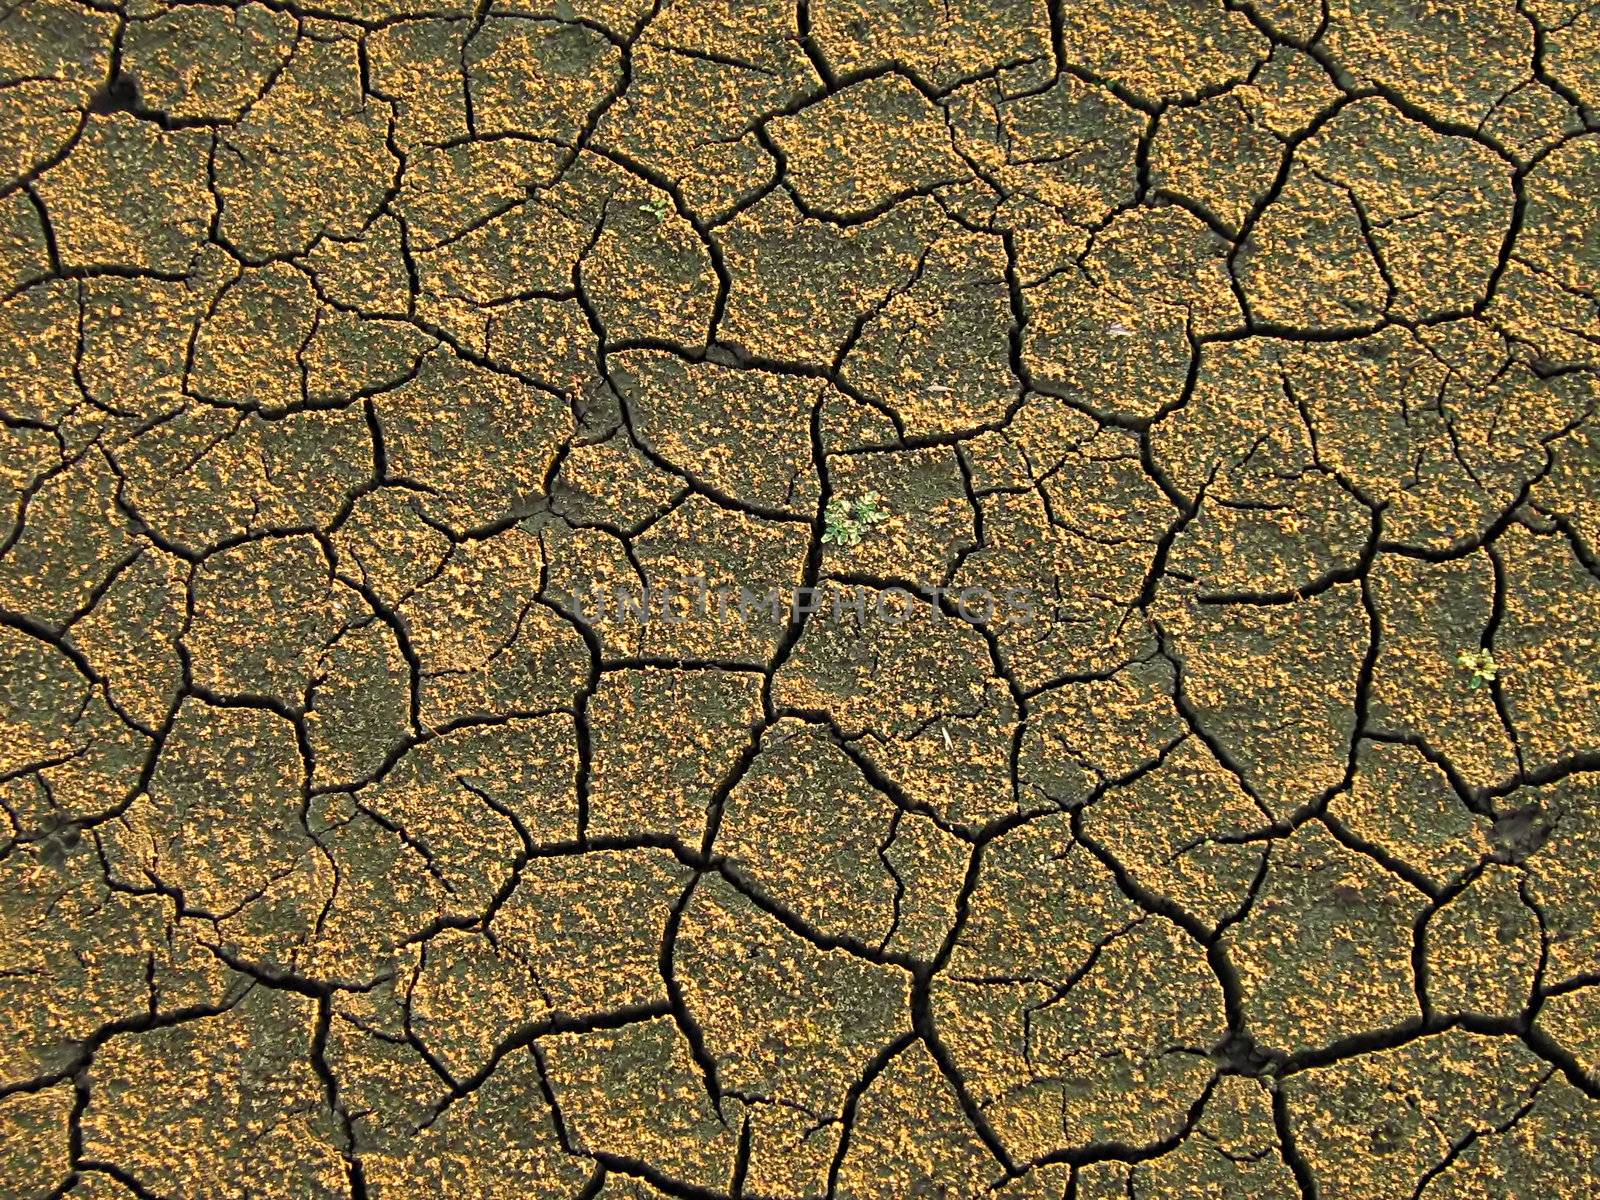 A photograph of dried mud detailing its texture.